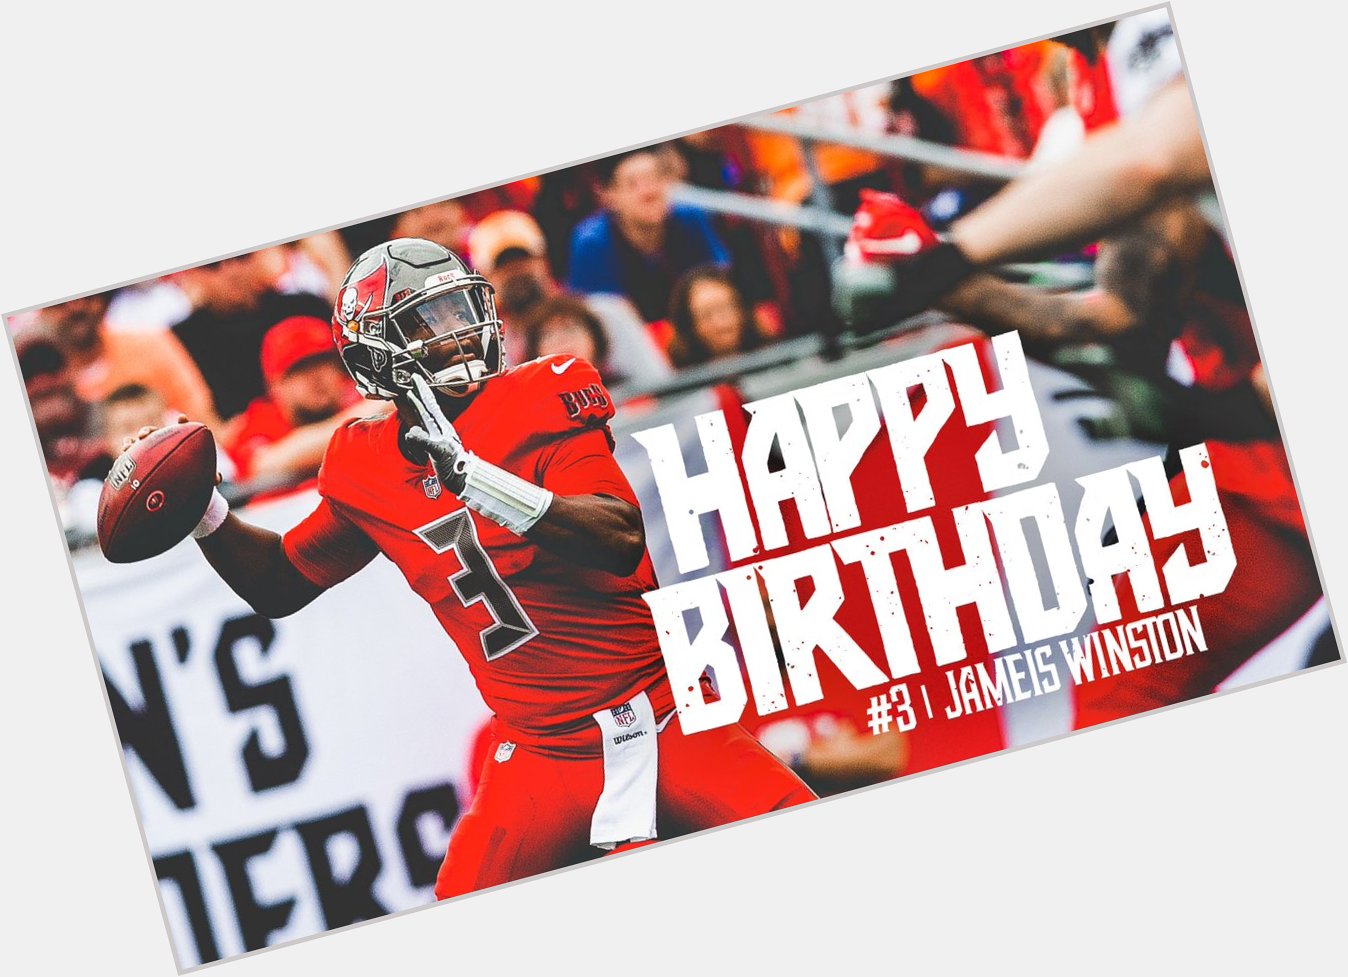 Happy Birthday, Jameis Winston! Join us in wishing a special day! 